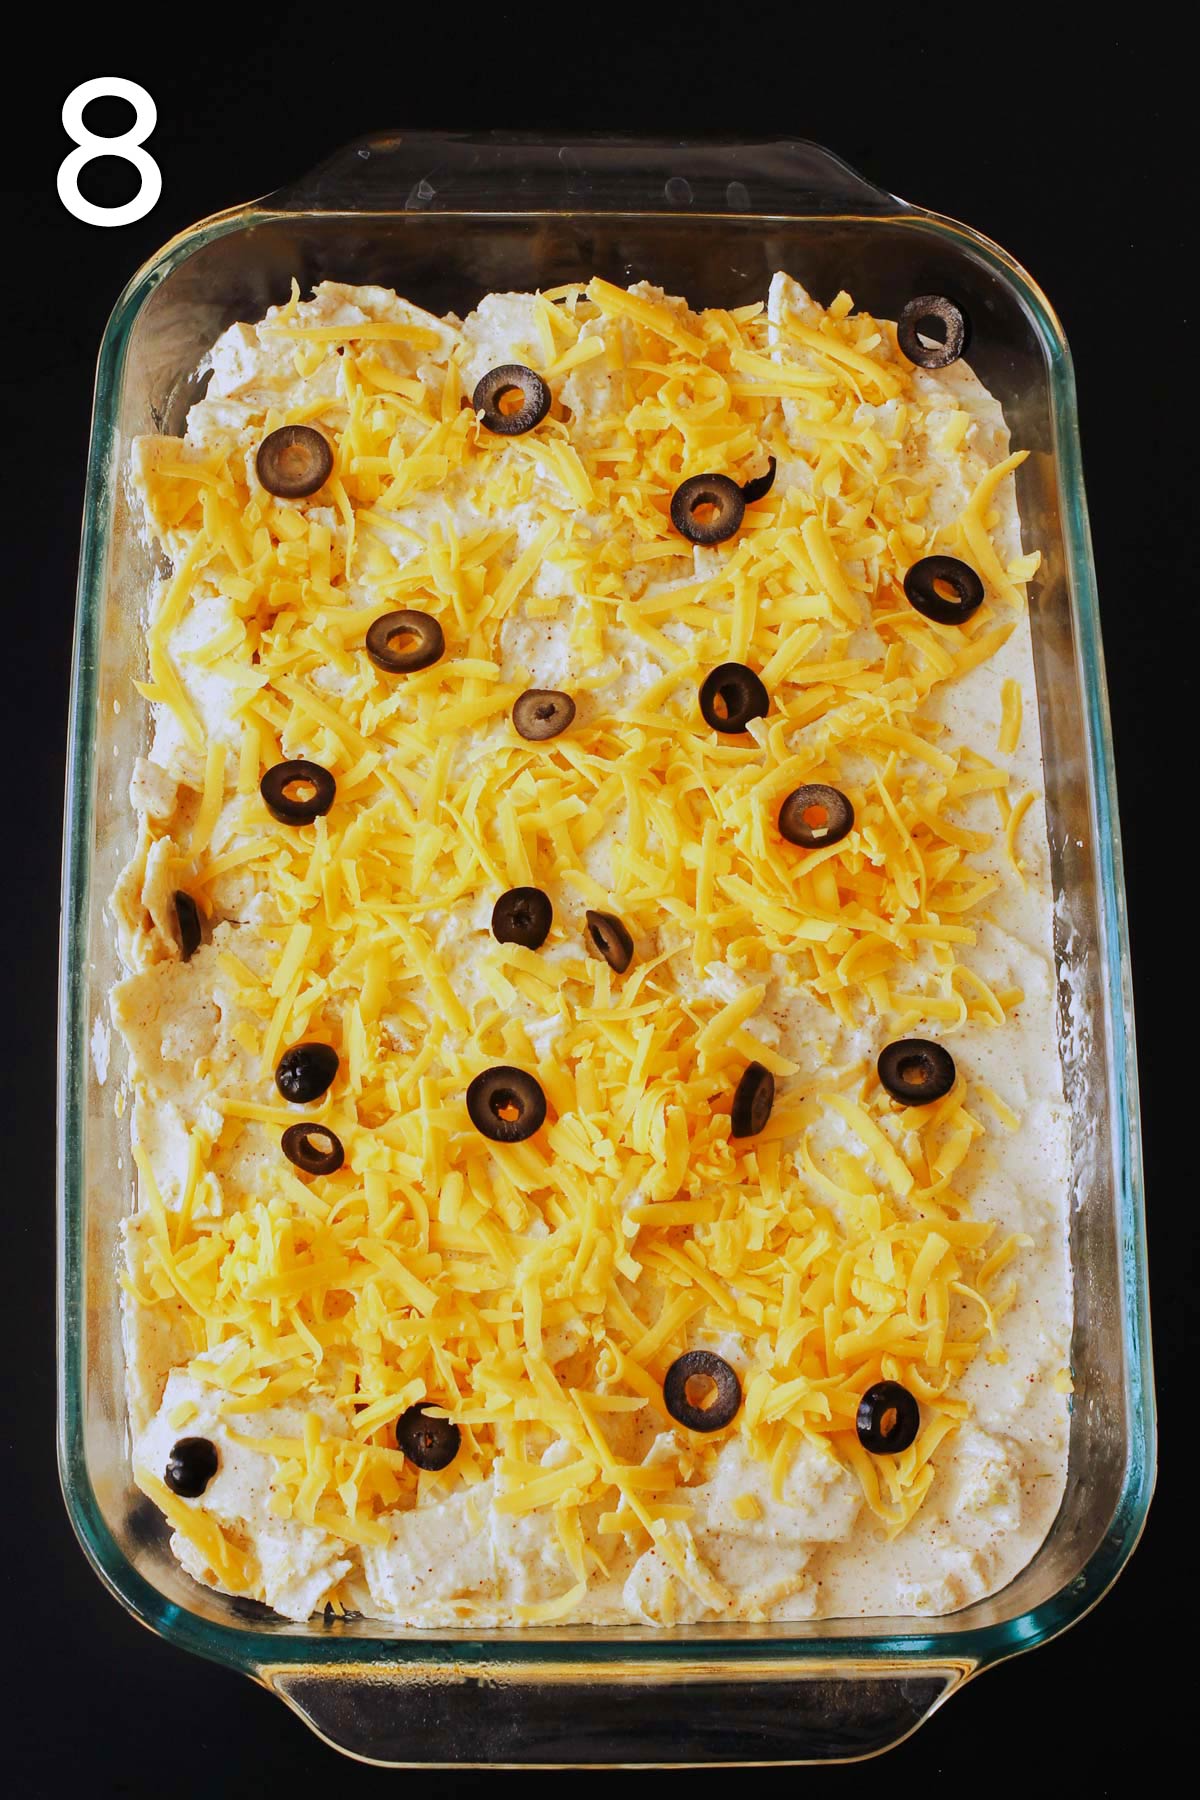 sliced black olives scattered over the top of the cheese layer.